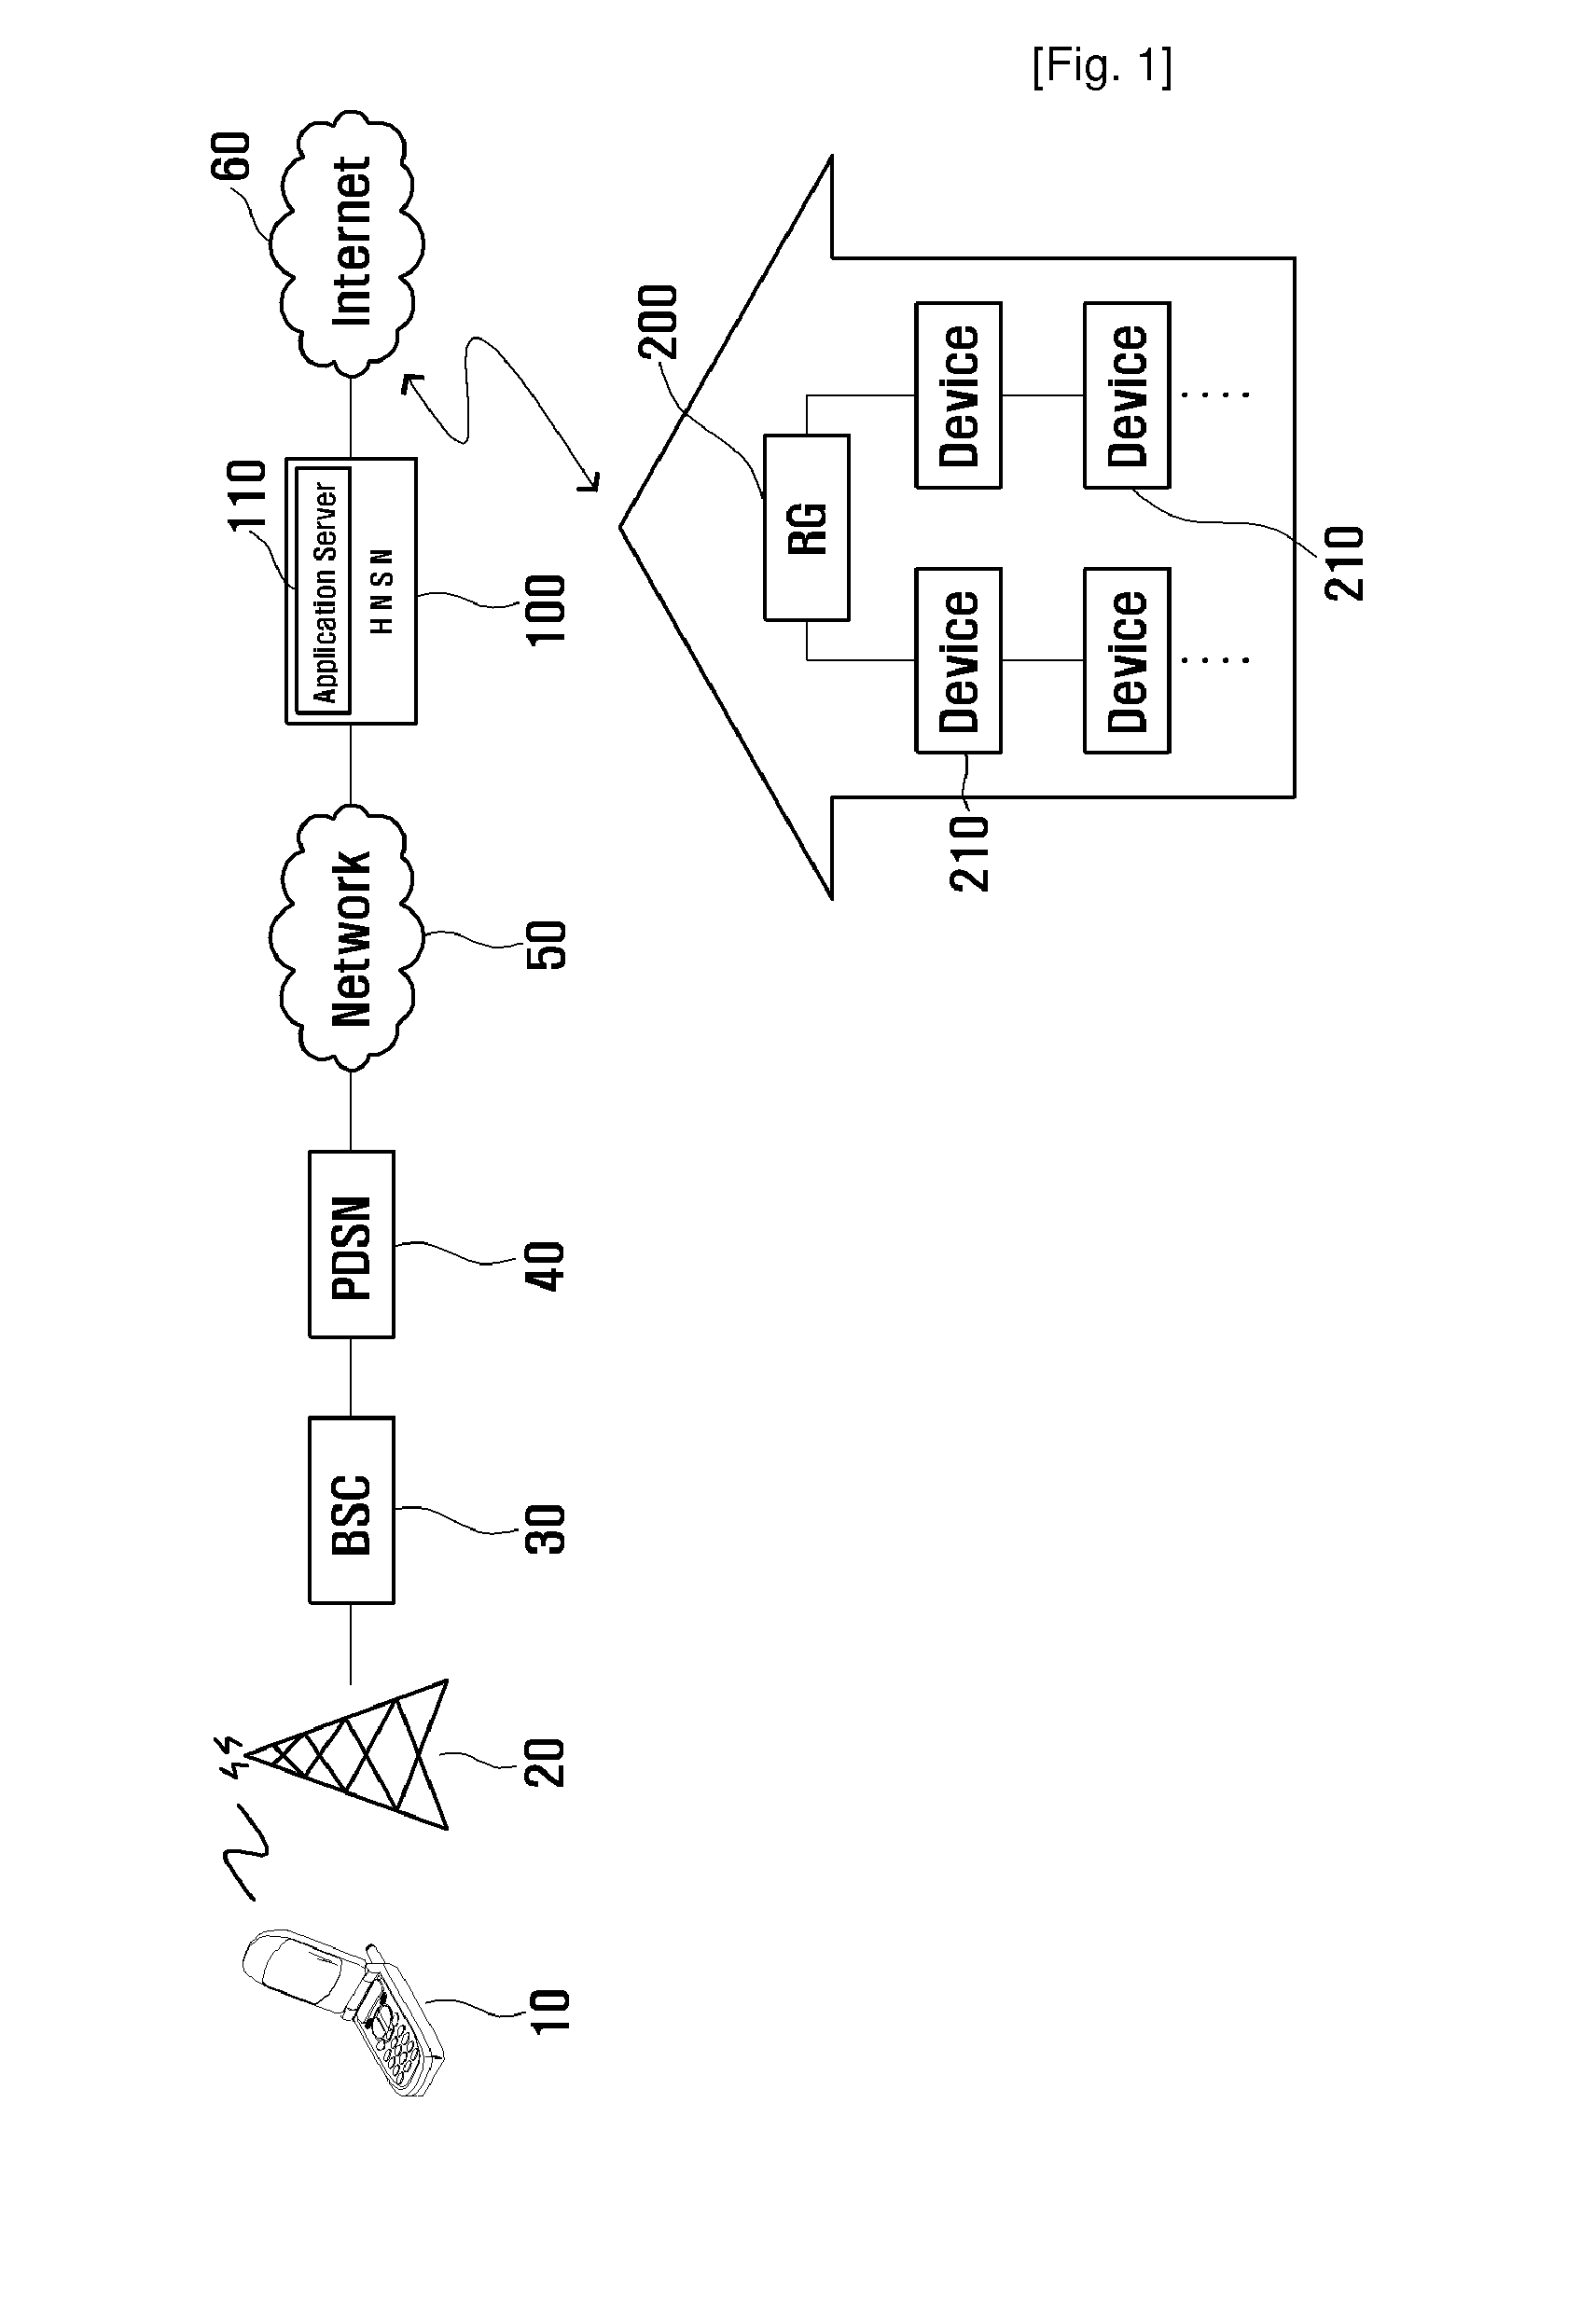 Home Network System, Method of Controlling the Same, Method of Setting Residential Gateway For the Same, and Method of Processing Event Protocol For the Same